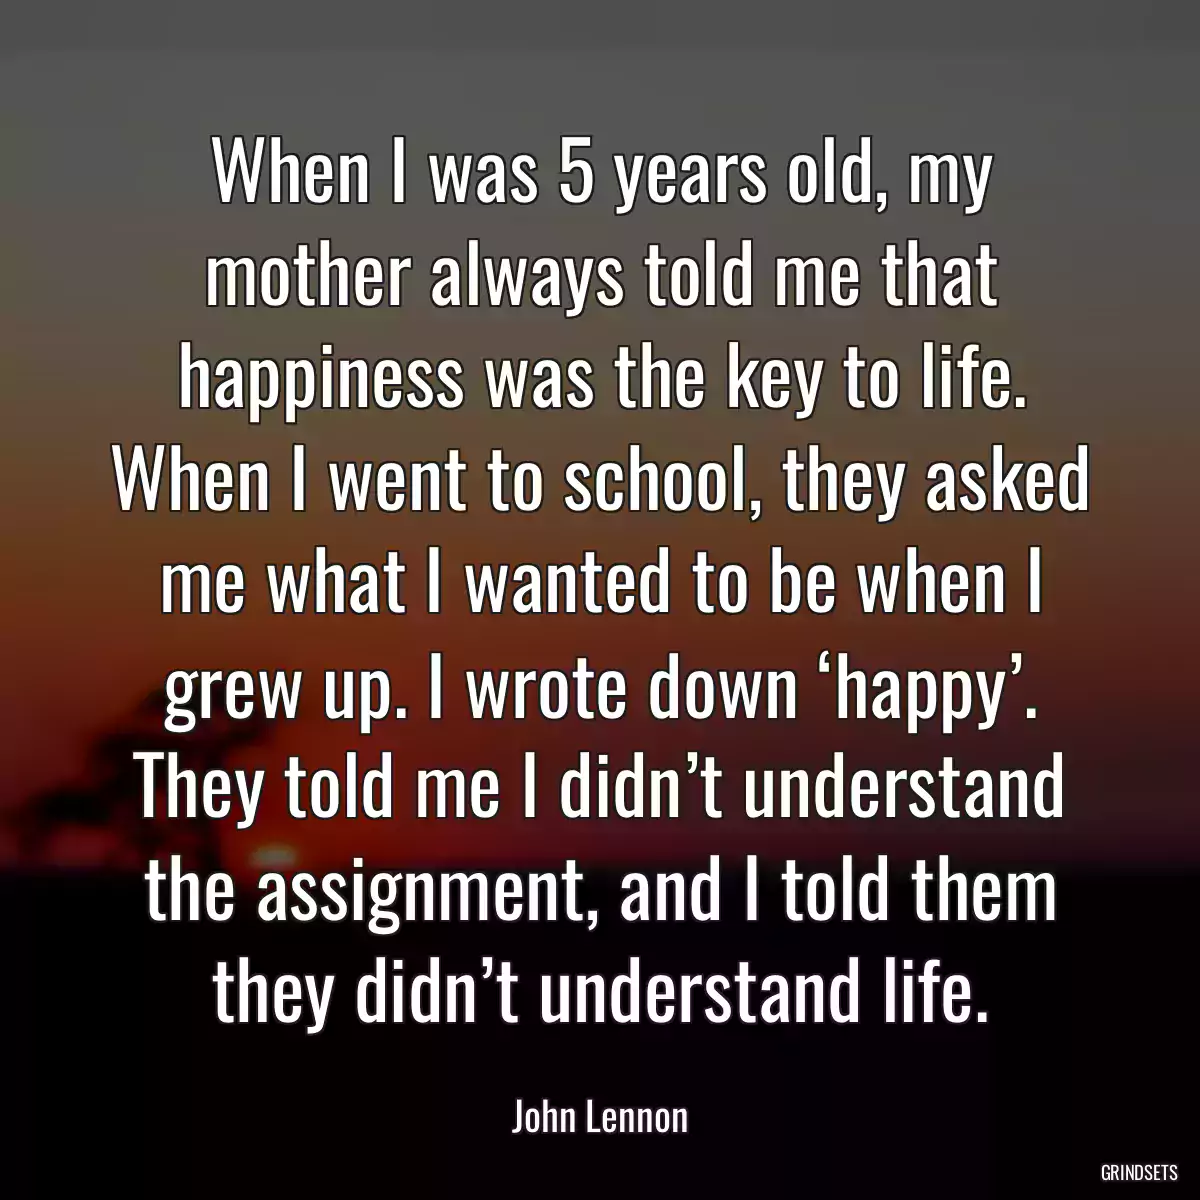 When I was 5 years old, my mother always told me that happiness was the key to life. When I went to school, they asked me what I wanted to be when I grew up. I wrote down ‘happy’. They told me I didn’t understand the assignment, and I told them they didn’t understand life.